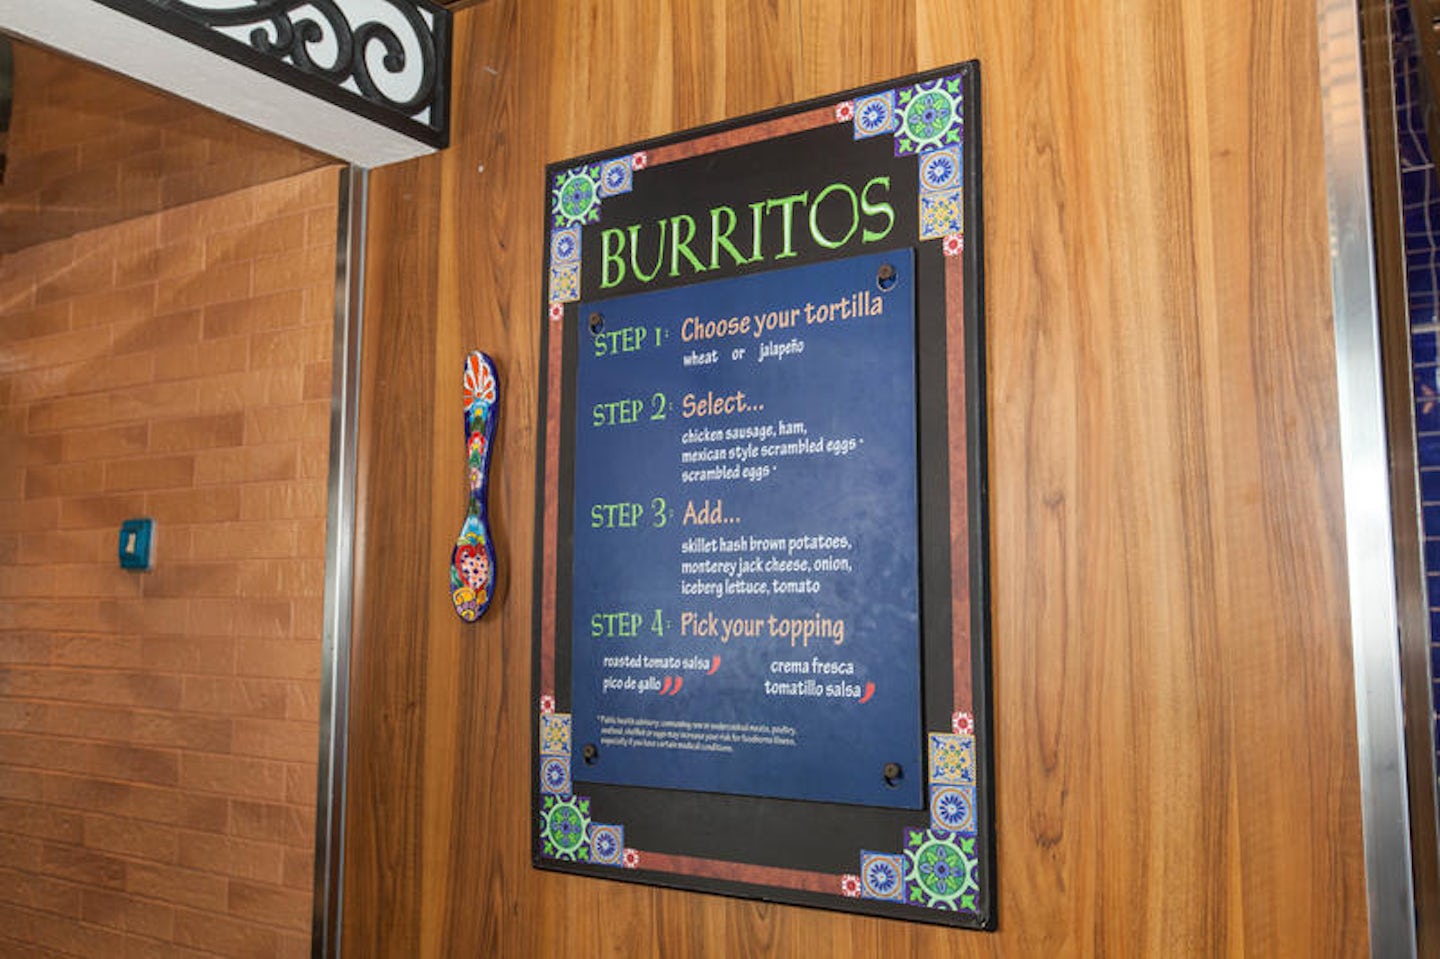 Blue Iguana Cantina on Carnival Conquest